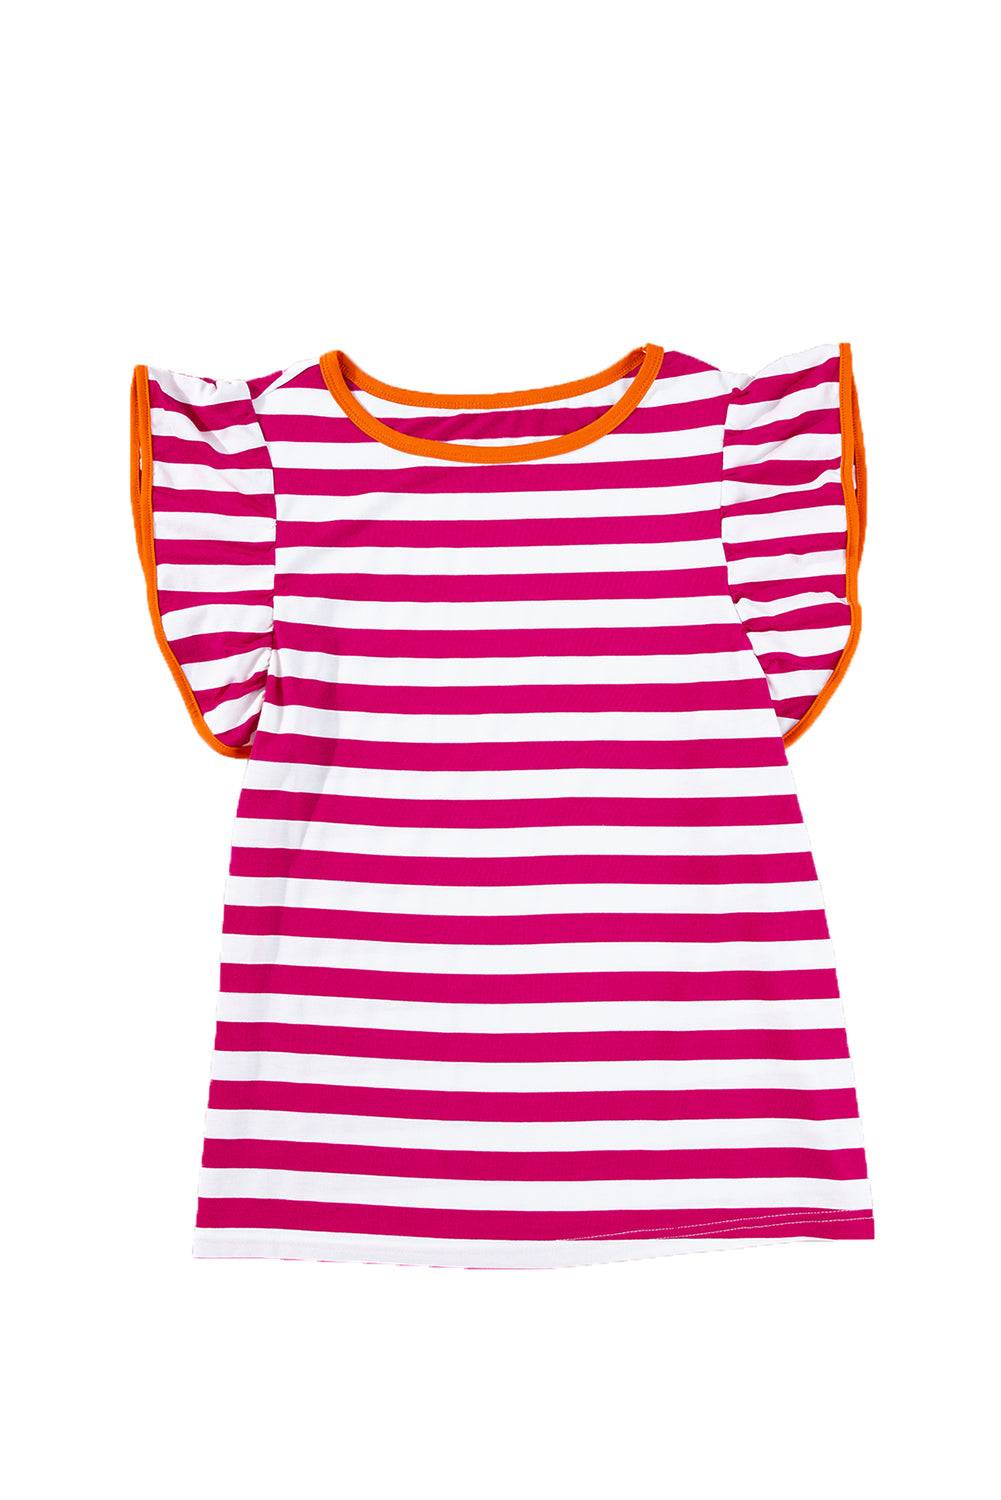 a pink and white striped top with orange trim